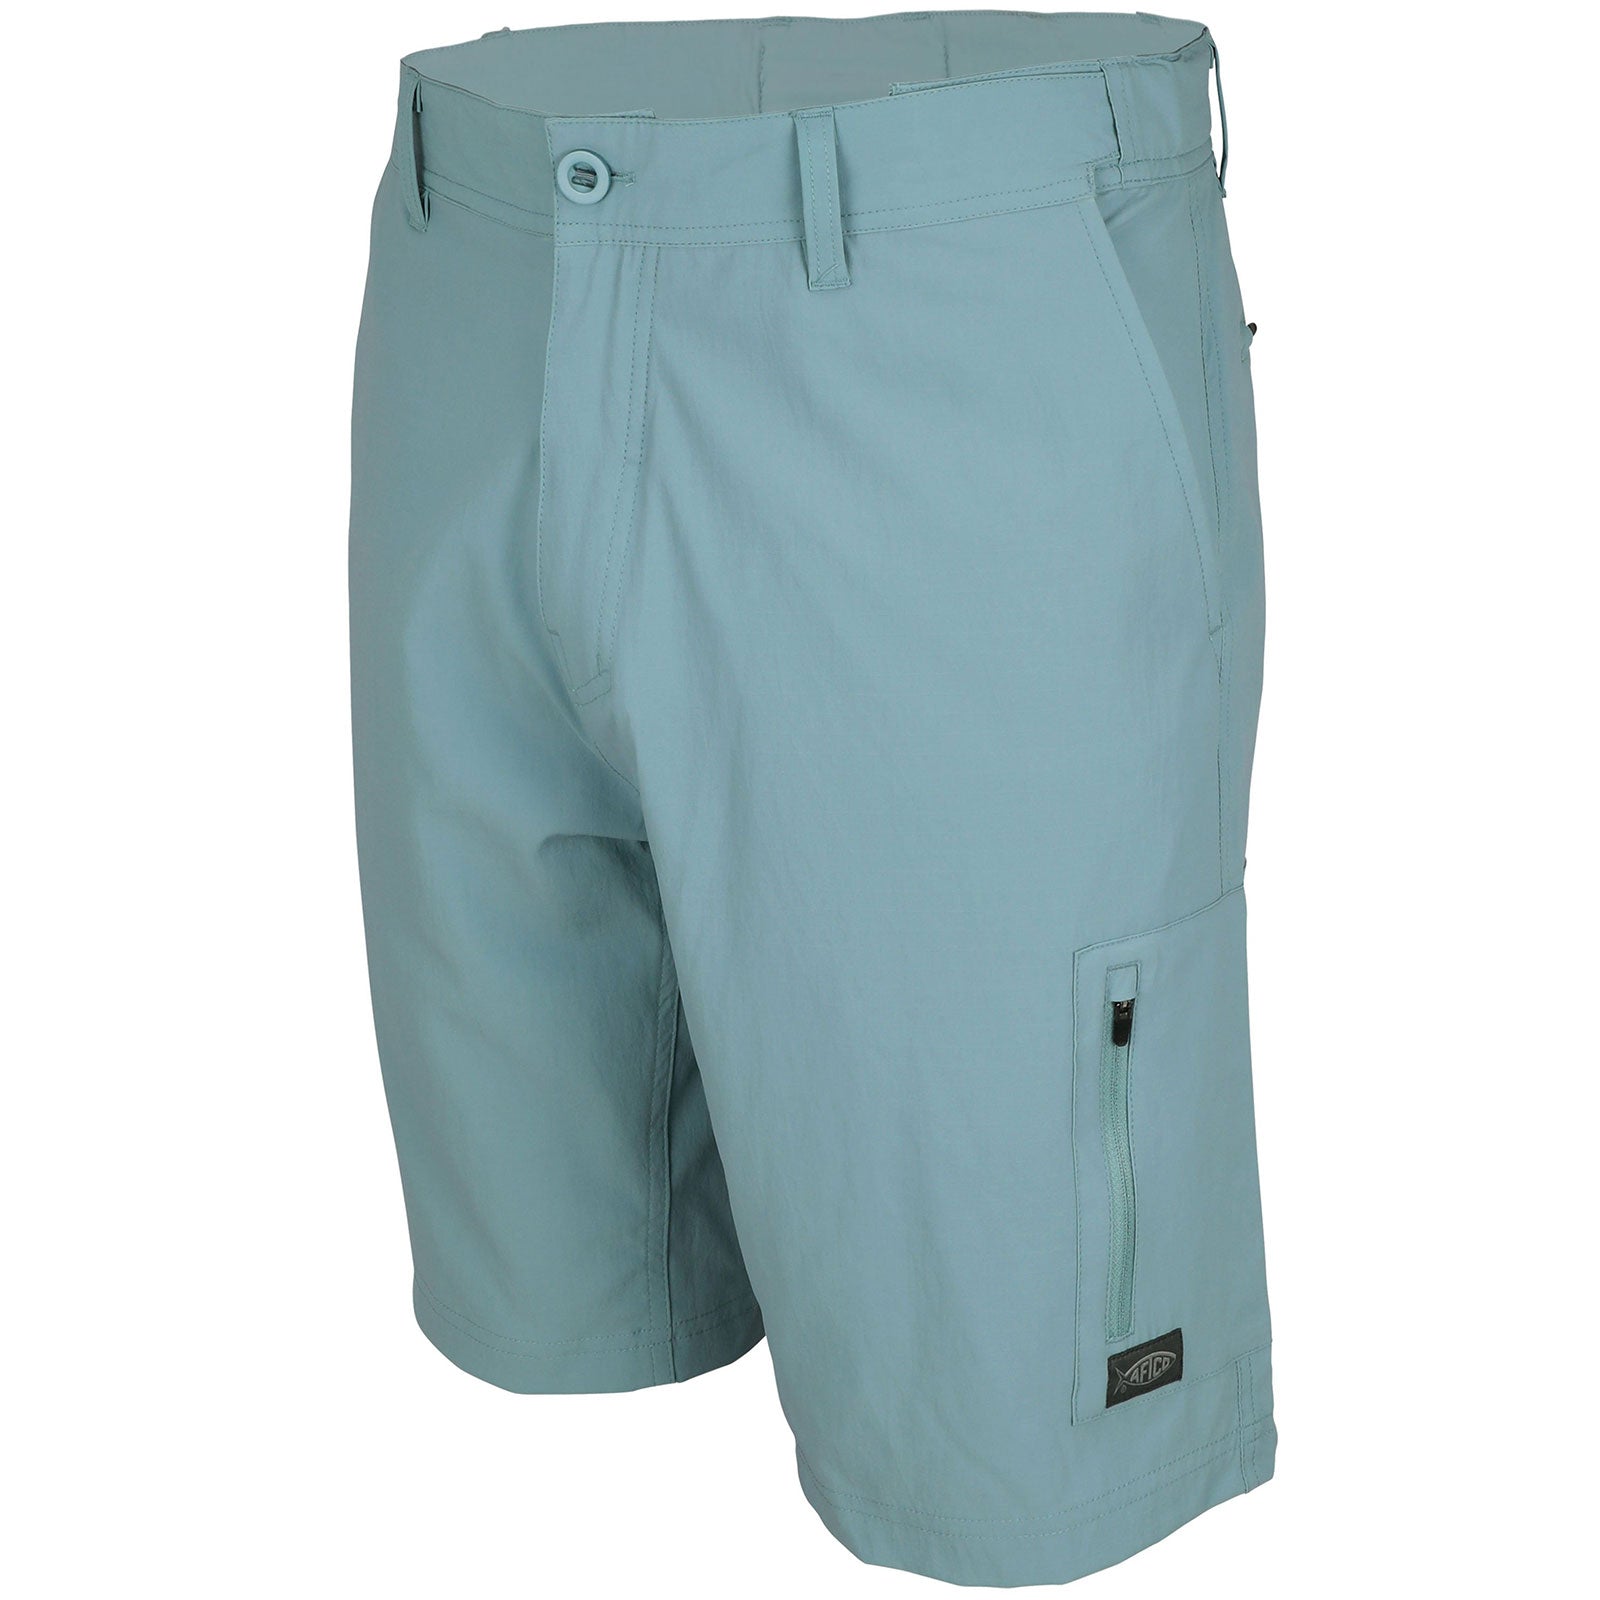 AFTCO's Rescue Cargo Fishing Shorts